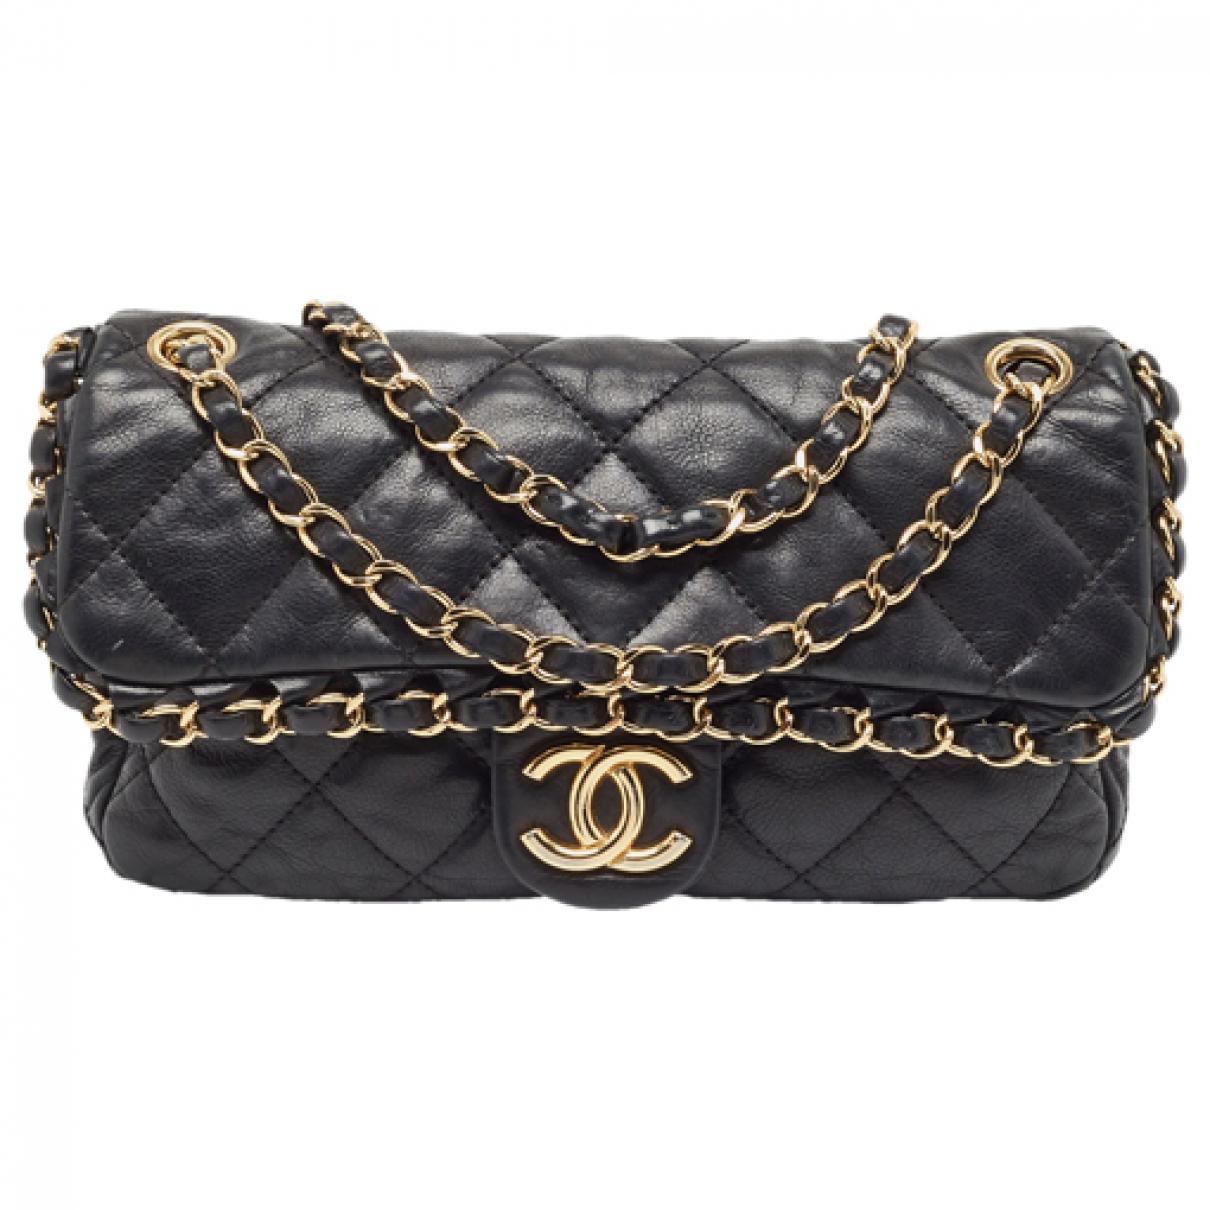 Coco curve leather handbag Chanel Black in Leather - 27477280